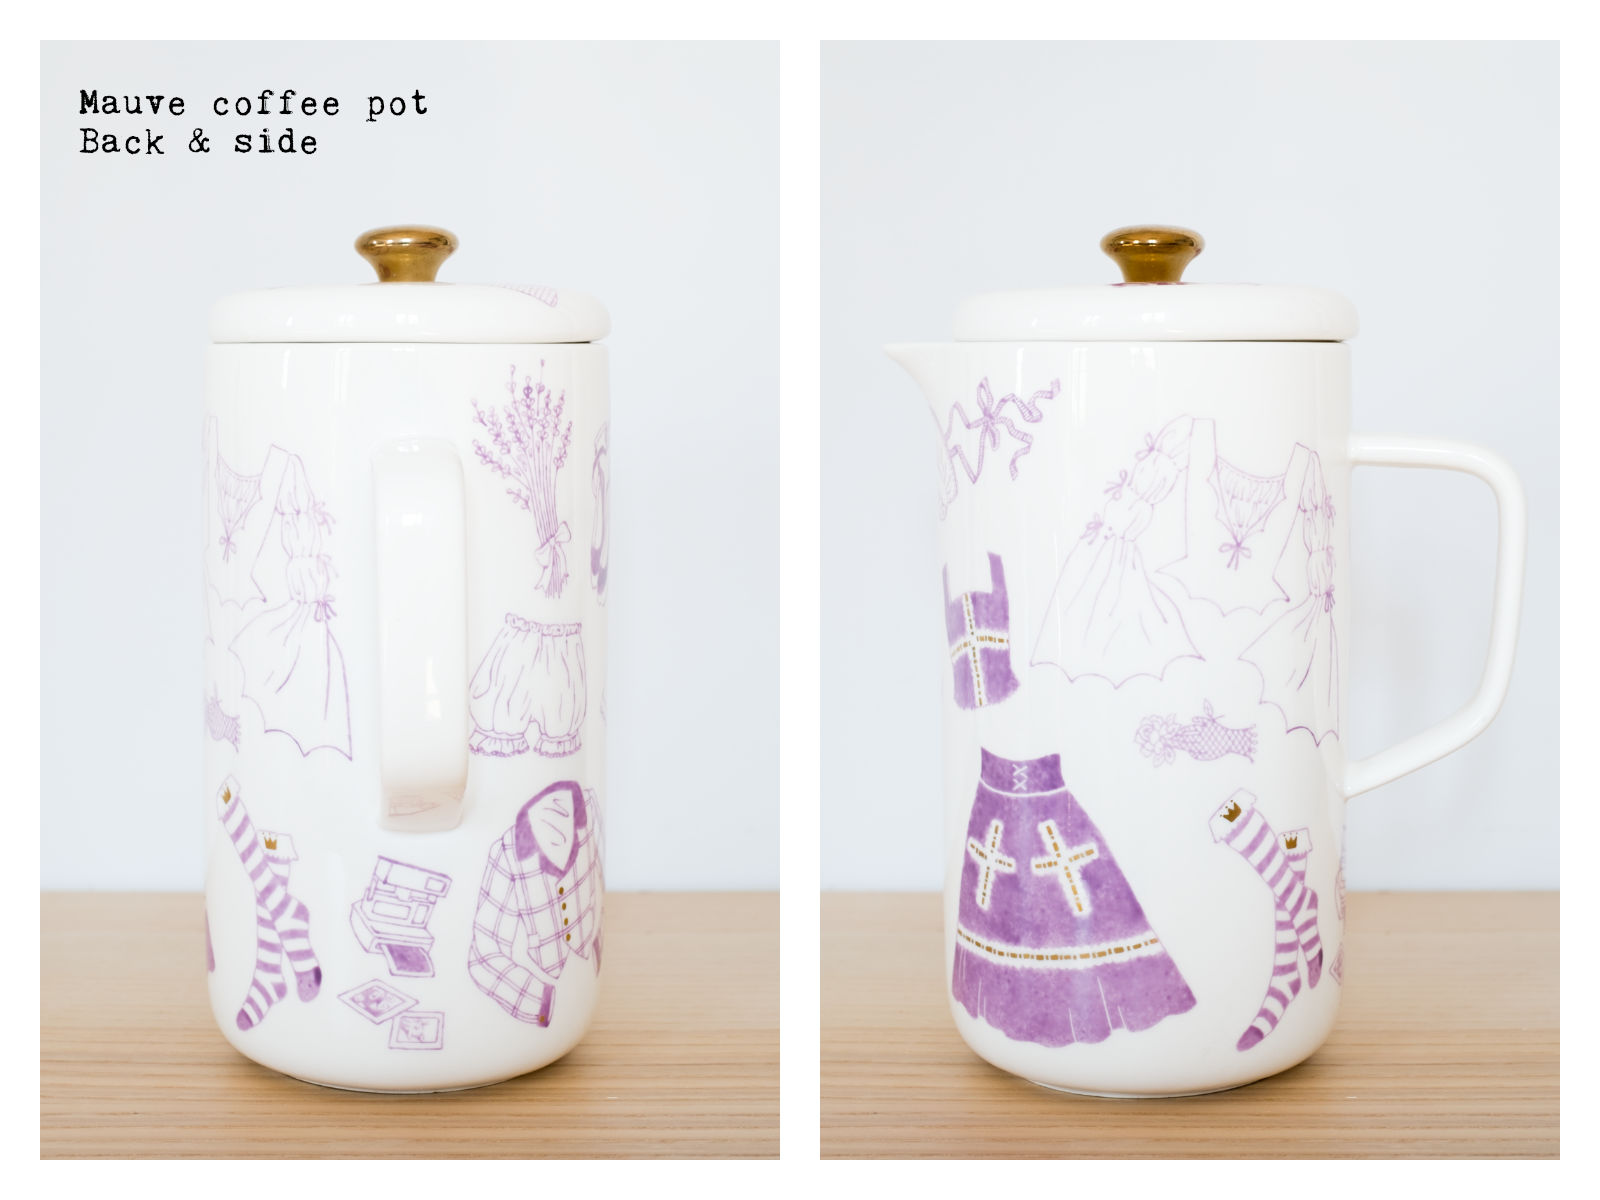 Back & side of a mauve coffee pot from “Oldschool Lolita”, a collection of painted porcelains by messalyn.